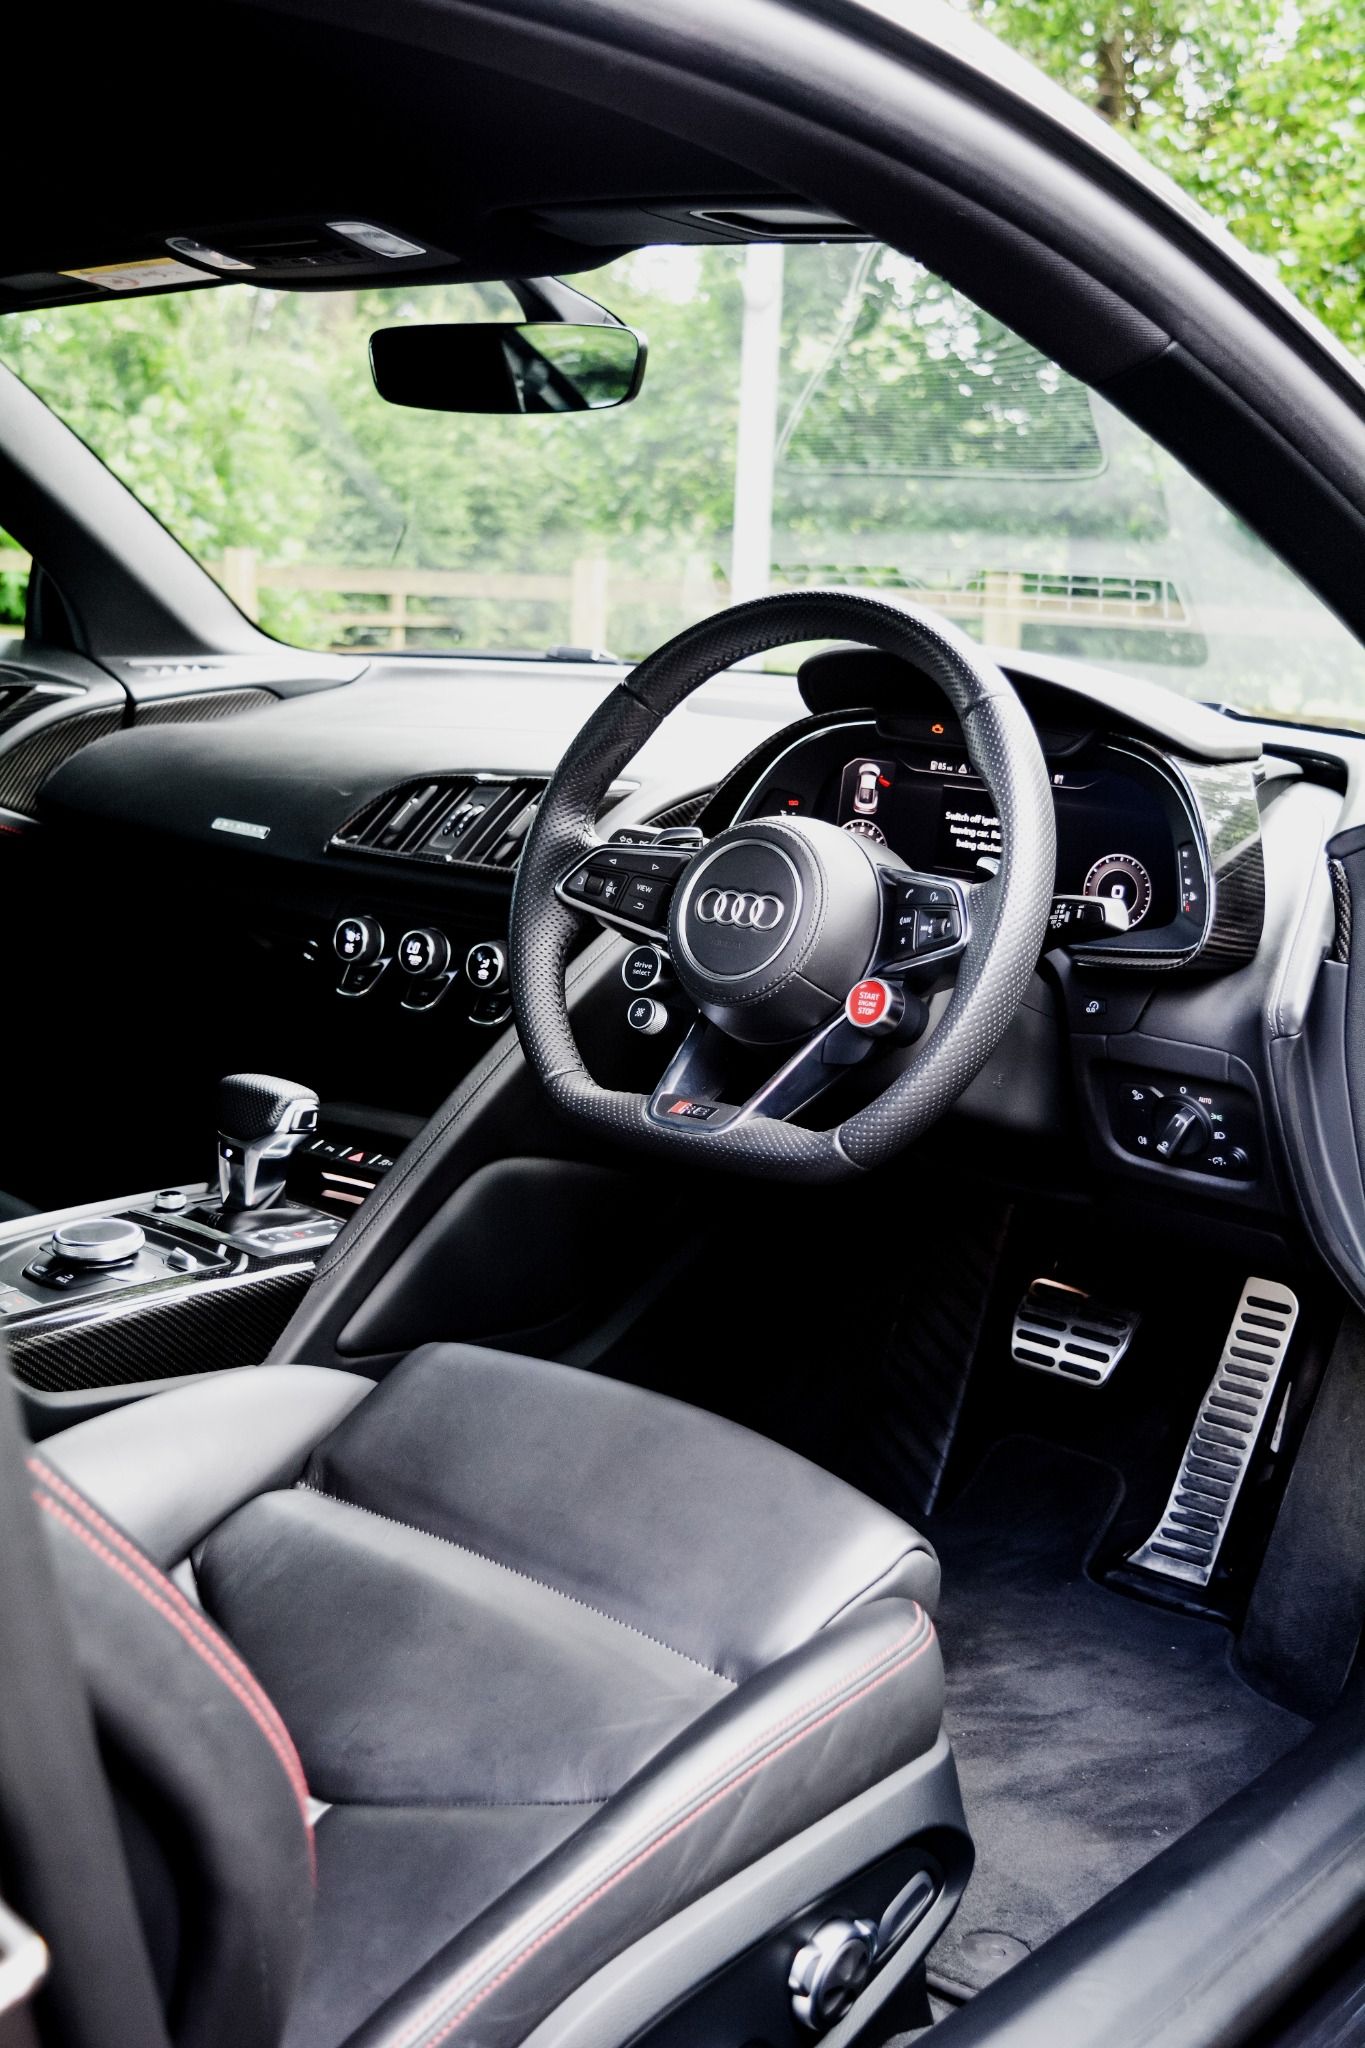 Interior of Audi R8 coupe showing leather seats, flat bottom steering wheel and stop start button